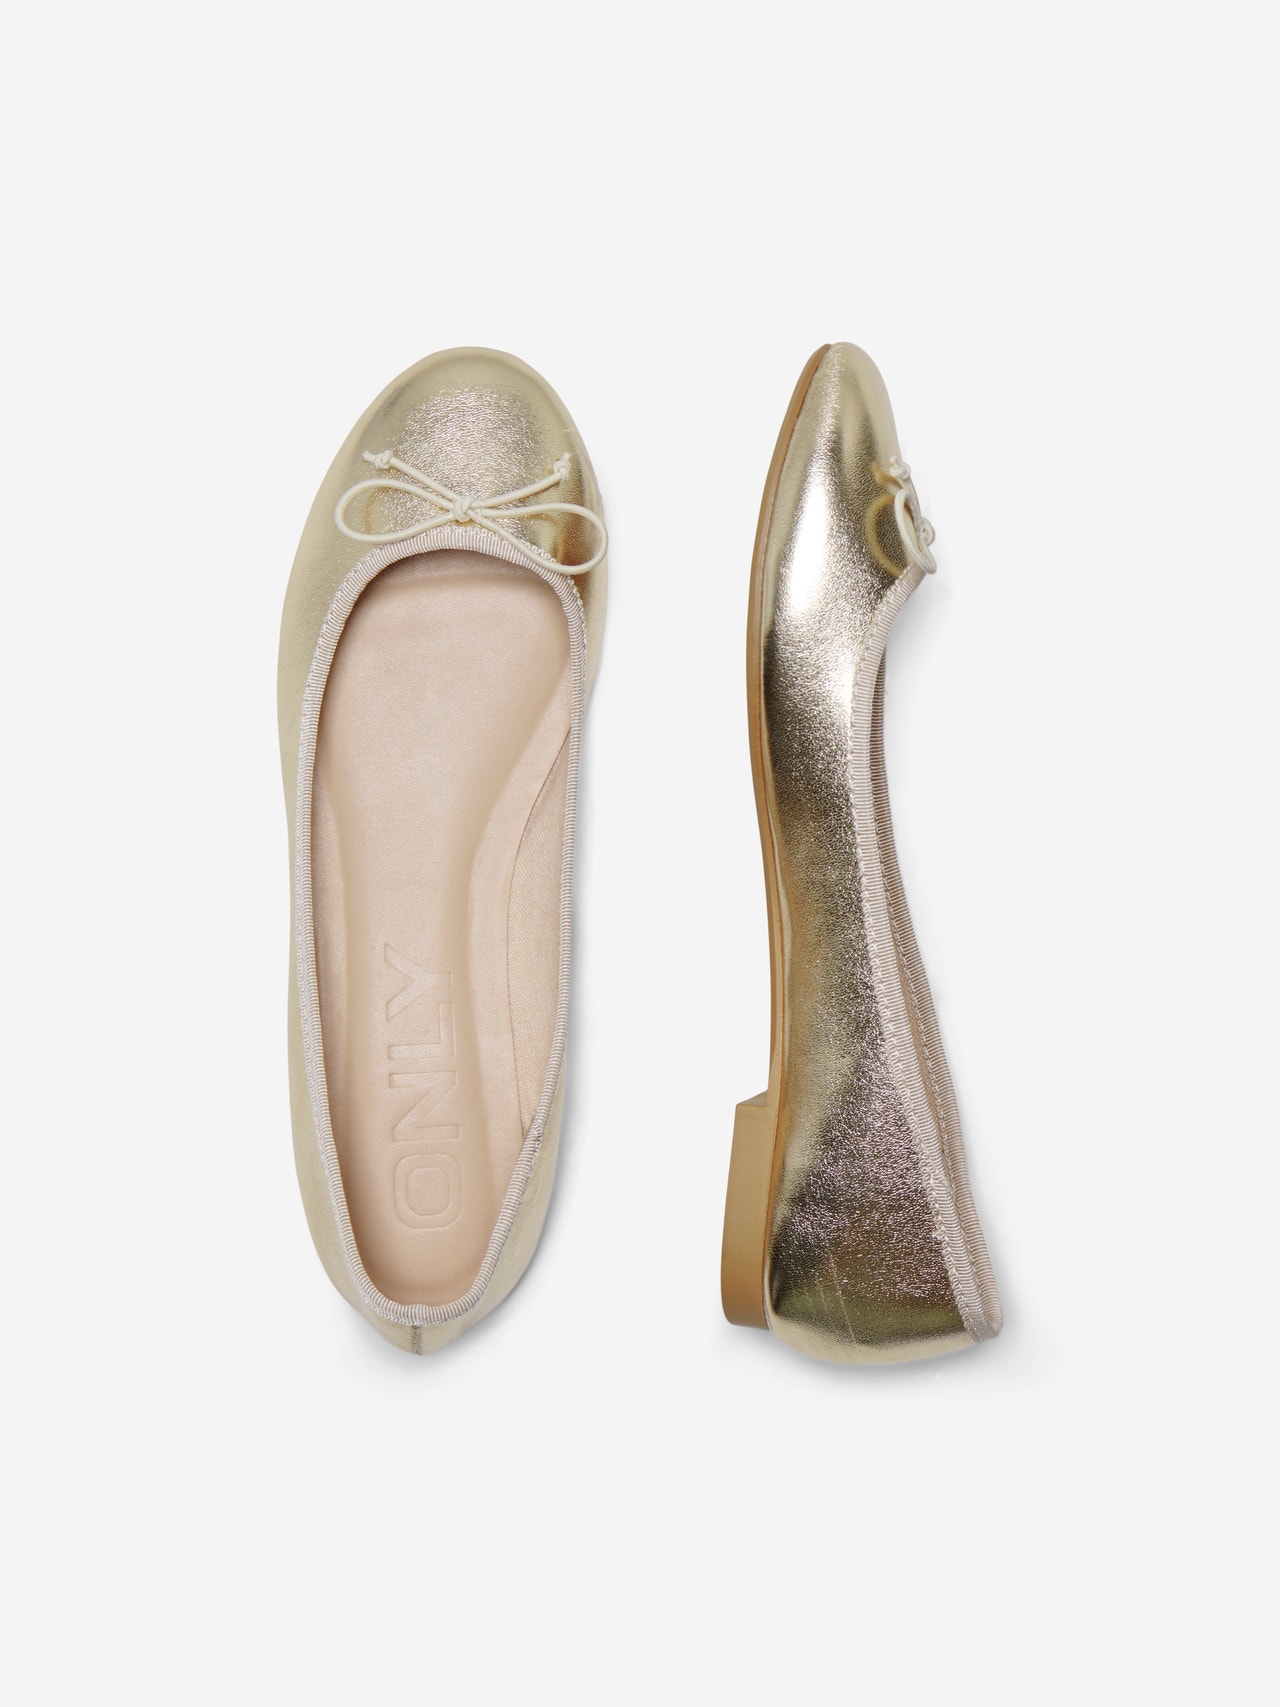 ONLY Ballerines Bout rond -Gold Colour - 15304513